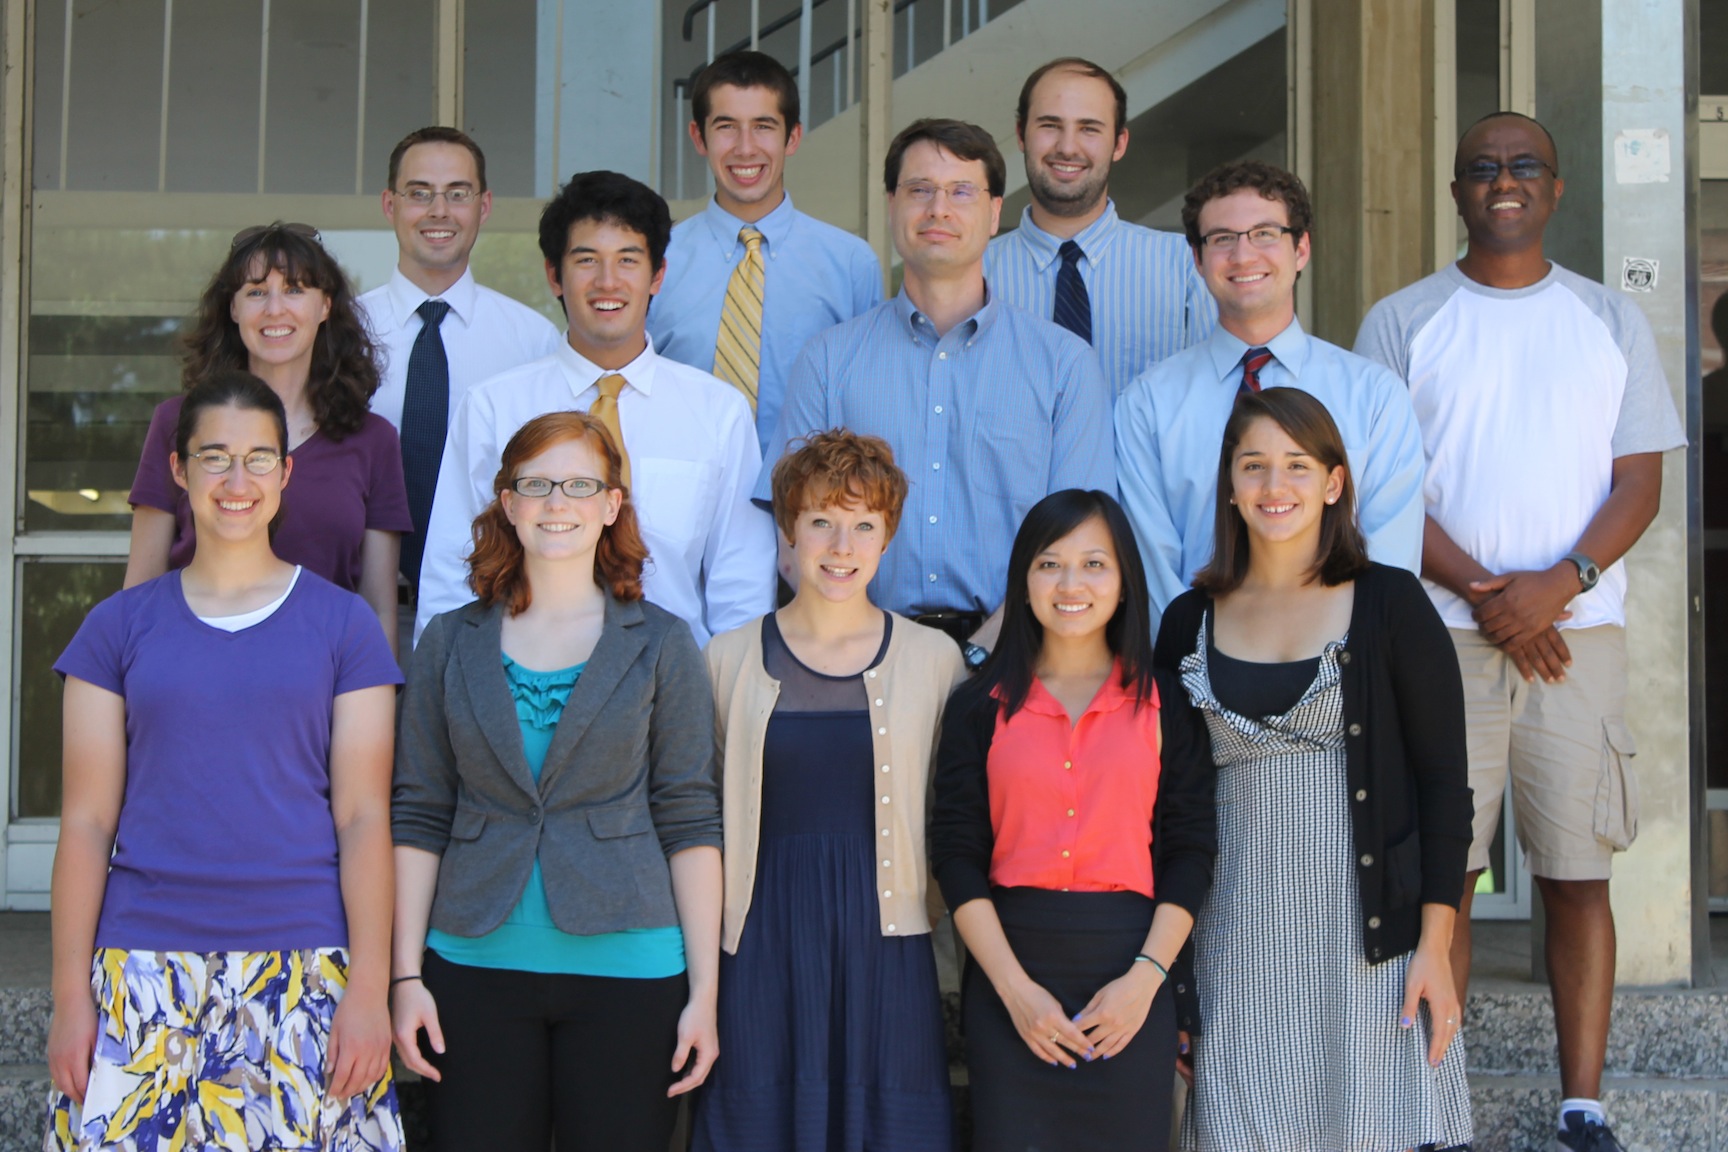 The 2012 REU group at the SUMMR conference at Michigan State University